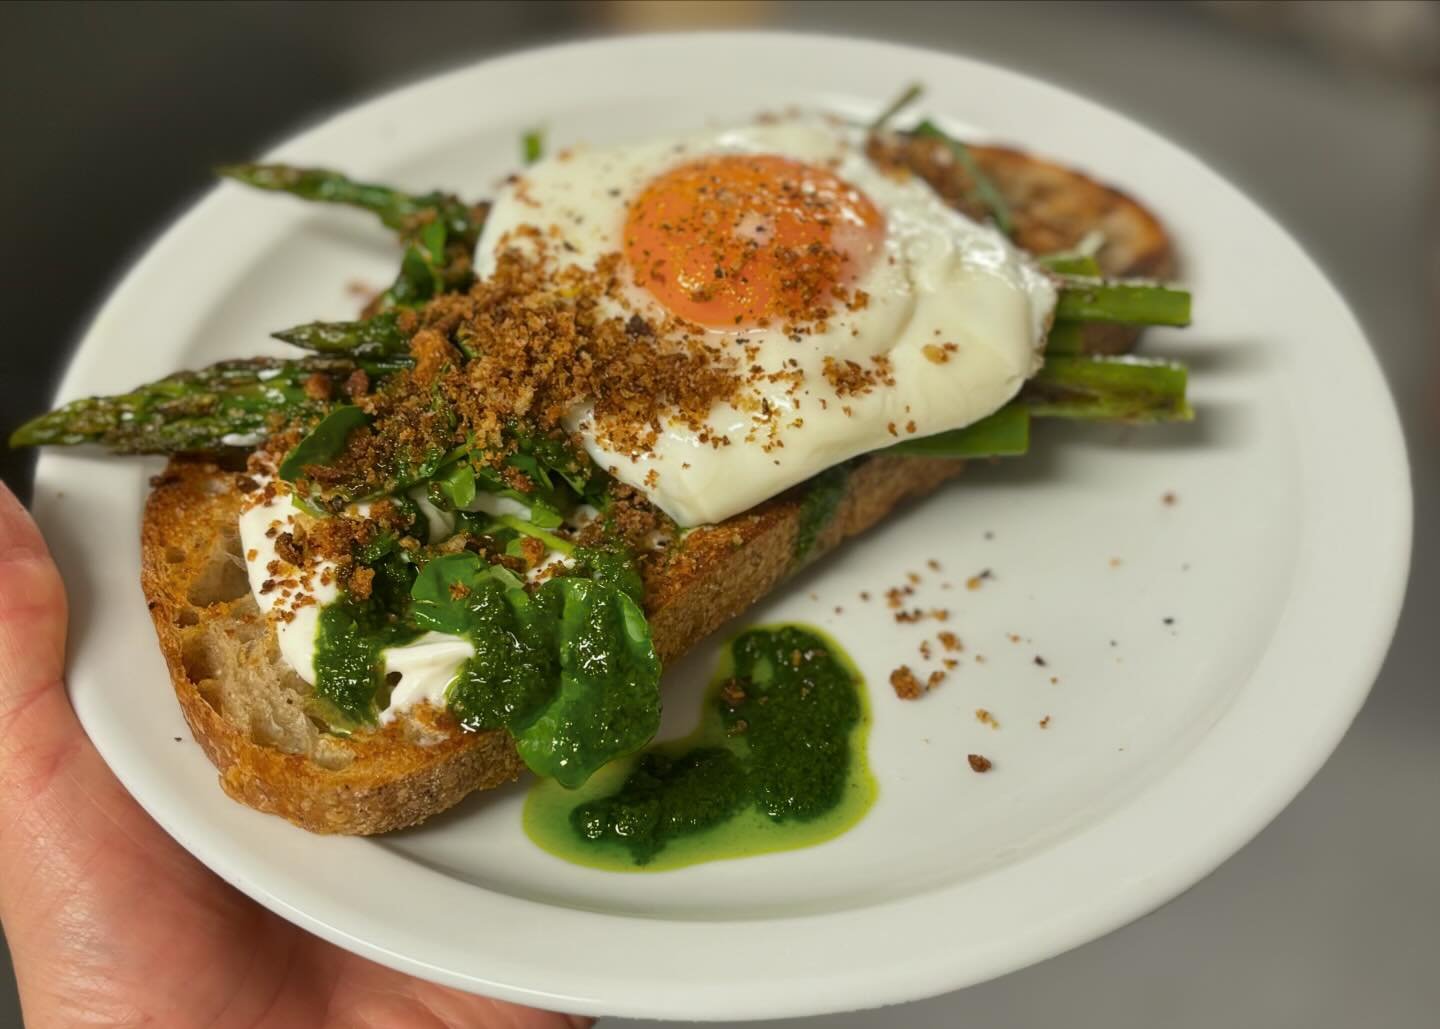 Last couple of days of our current weekly special 💥 It&rsquo;s a proper banger making the most of the current supply of local asparagus!
&bull;
Griddled asparagus &amp; lemon ricotta on sourdough with watercress, parsley oil, fried egg and gremolata